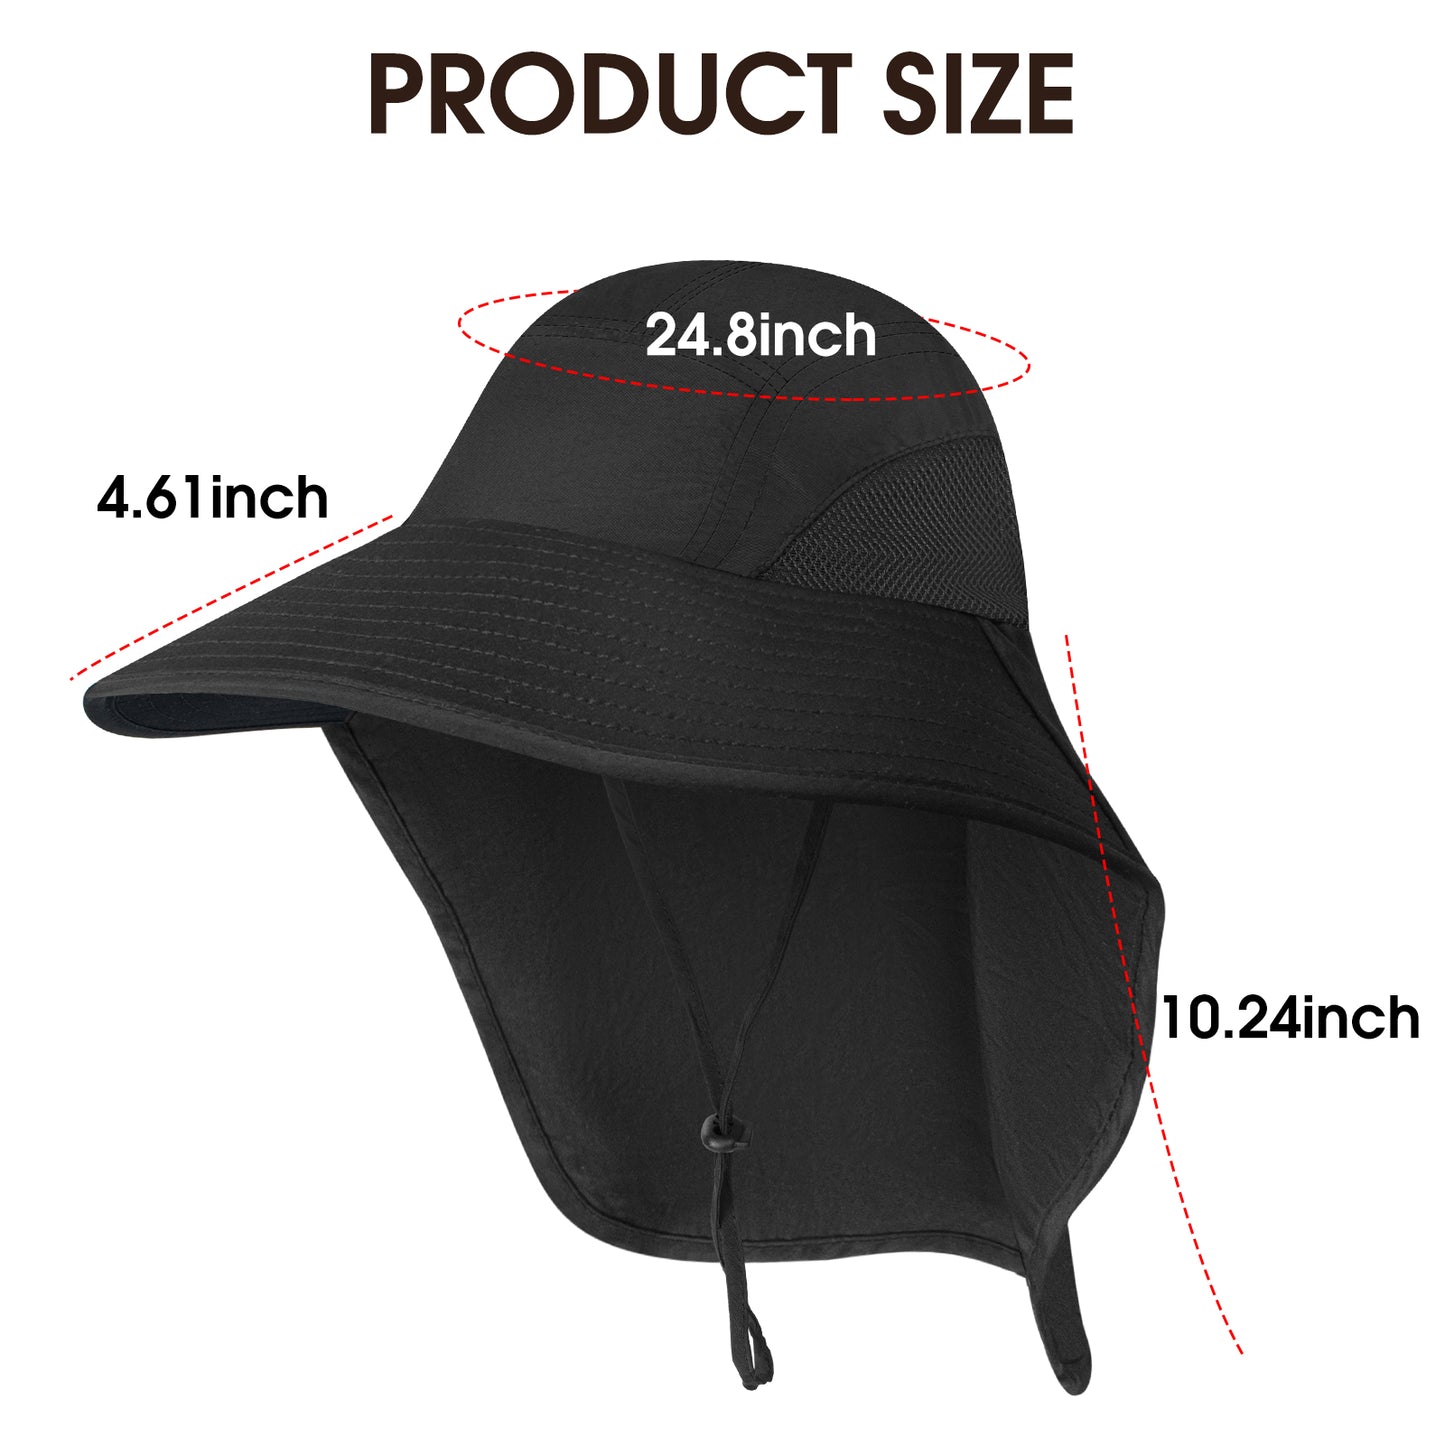 Loritta Sun Hat for Men and Women，Waterproof Nylon UPF 50+ Sun Protection Wide Brim Hat with Large Neck Flap Hiking Fishing Hats